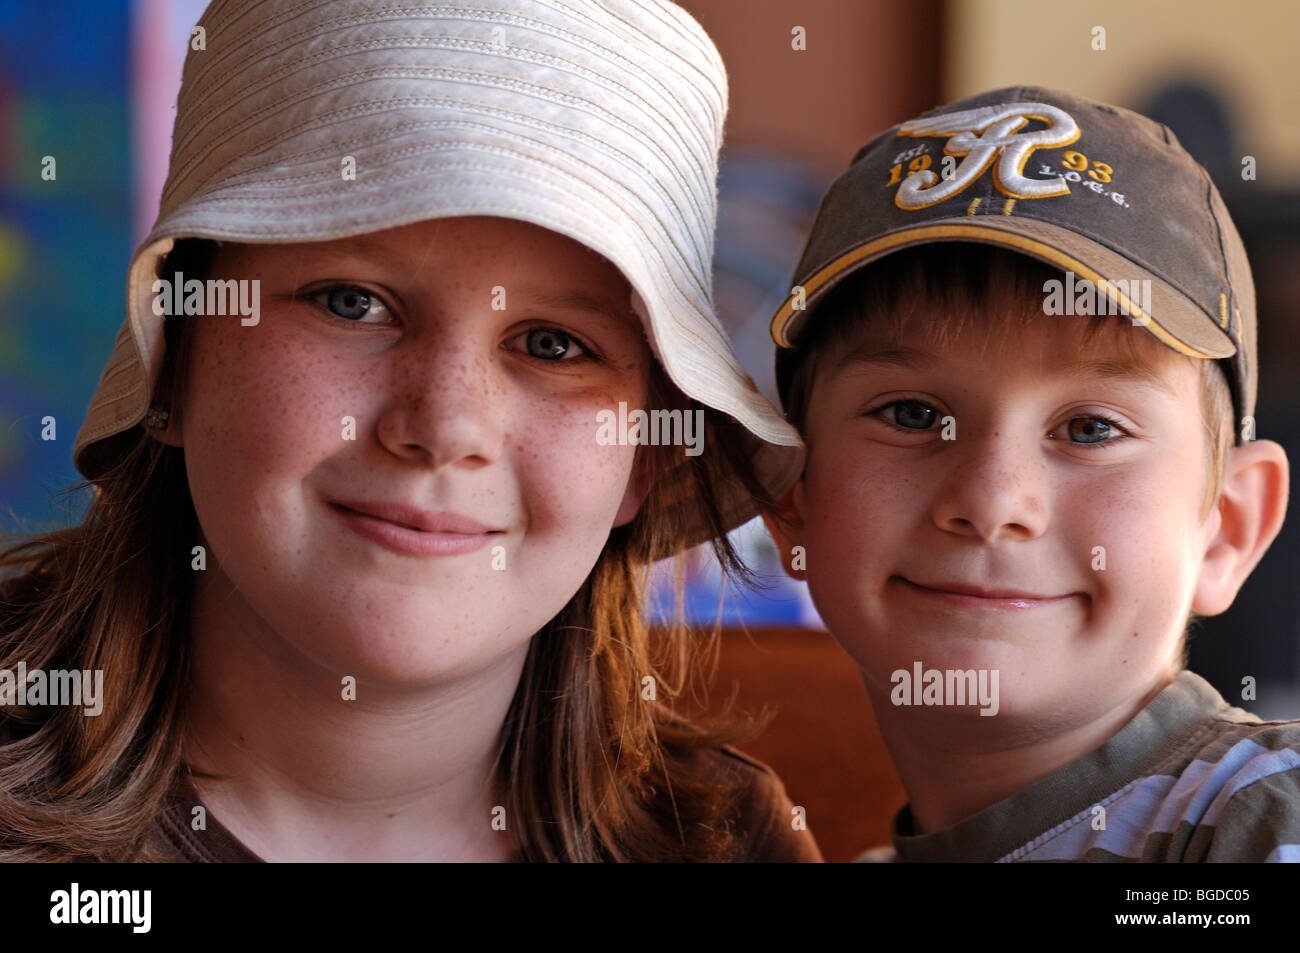 Portrait of a young girl with freckles and a hat and a young boy wearing a peaked cap Stock Photo